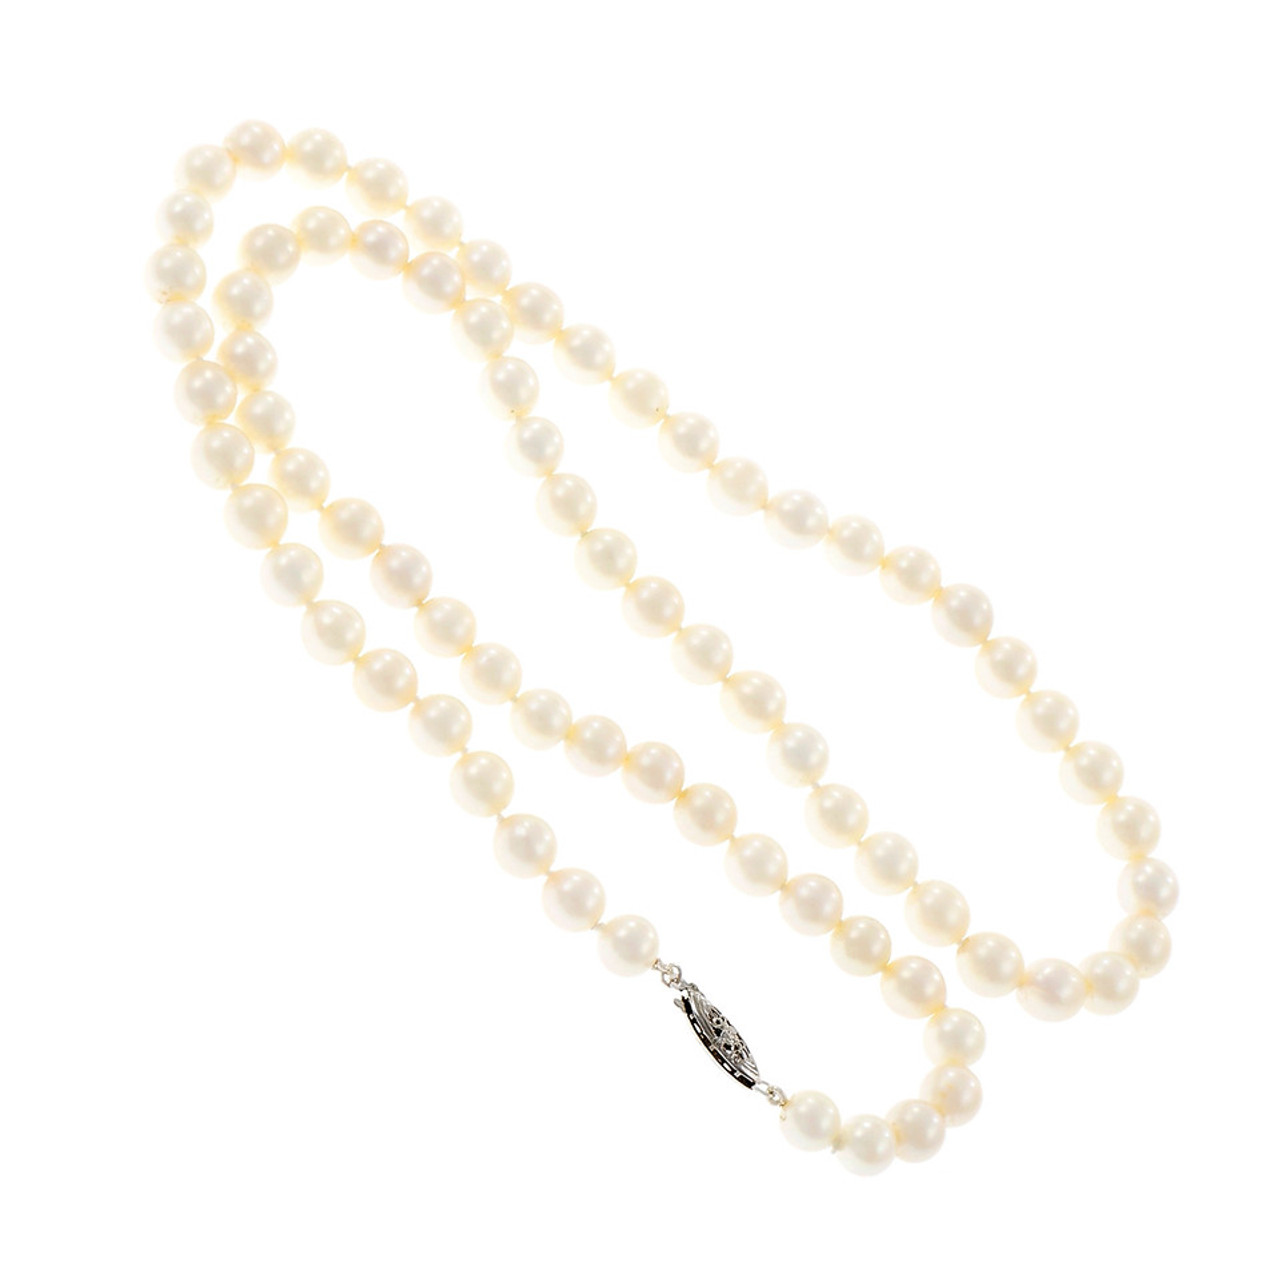 Chanel Imitation Pearl and Gold Metal Necklace, 1994, Fashion | Chain, Vintage Jewelry (Very Good)